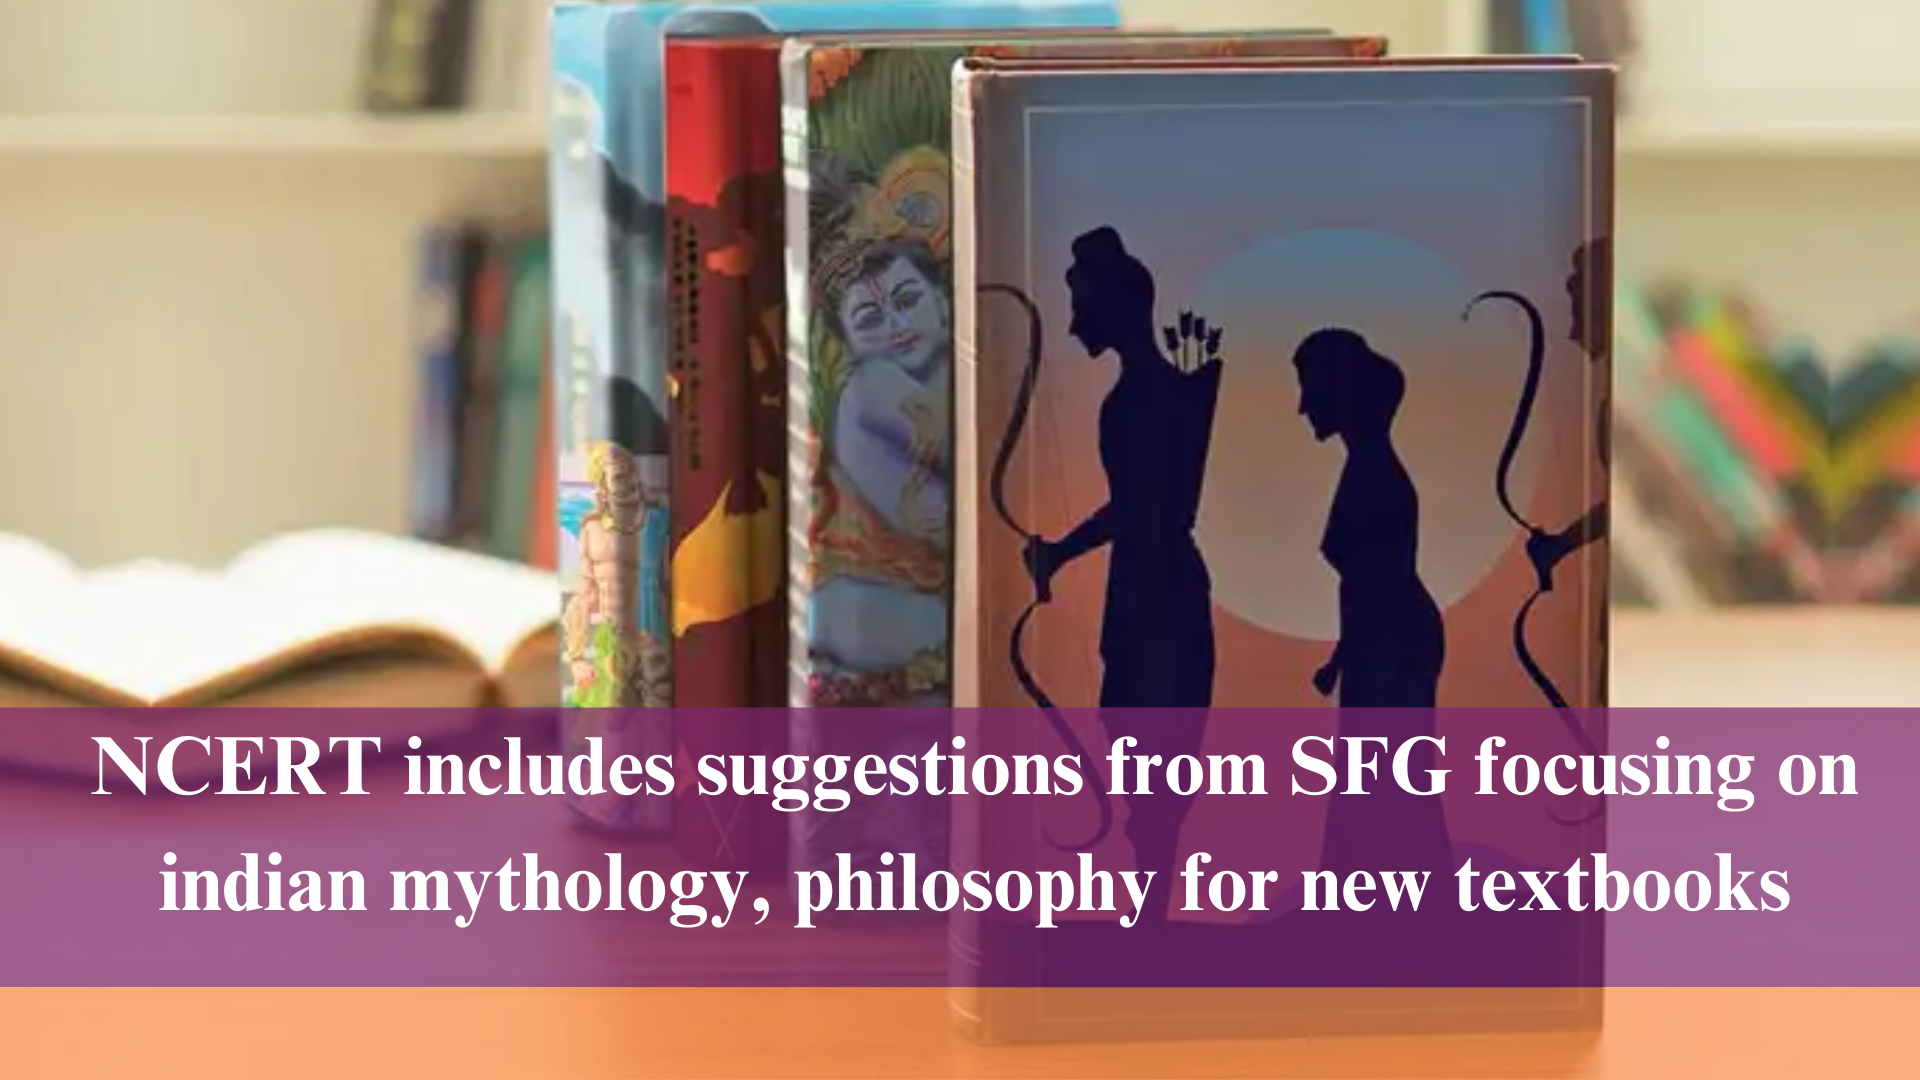 NCERT includes suggestions from sfg focusing on indian mythology, philosophy for new textbooks